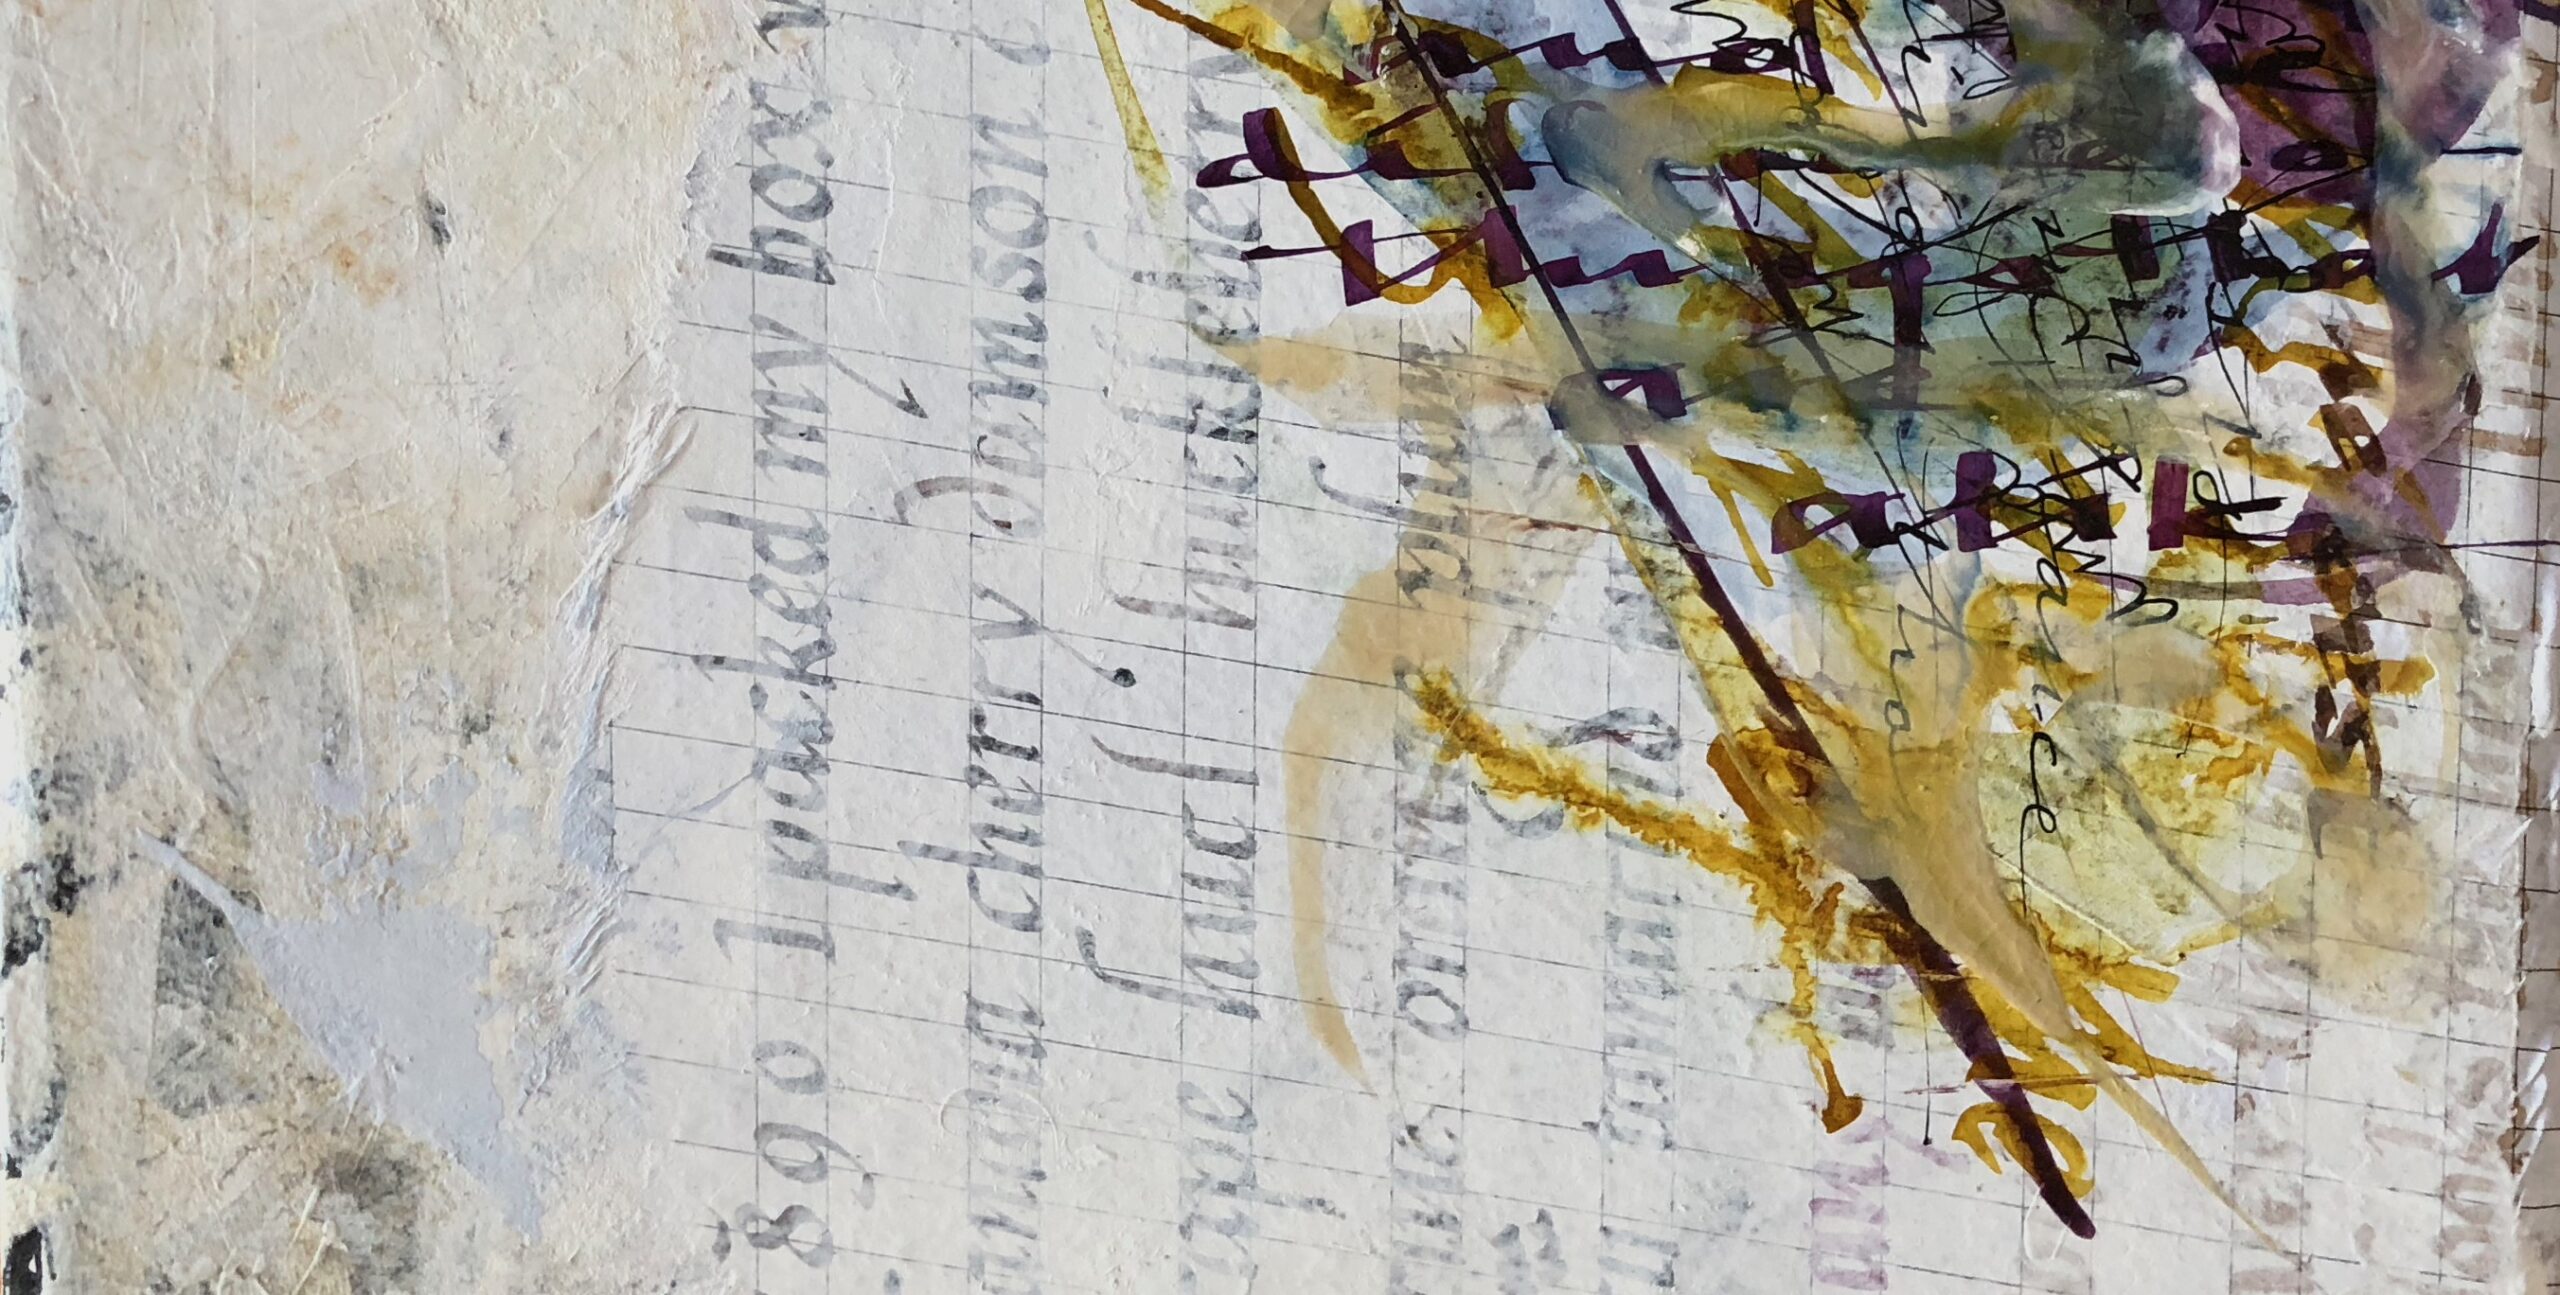 Mixed-media collage. Italic script visible underneath paint and other writing.